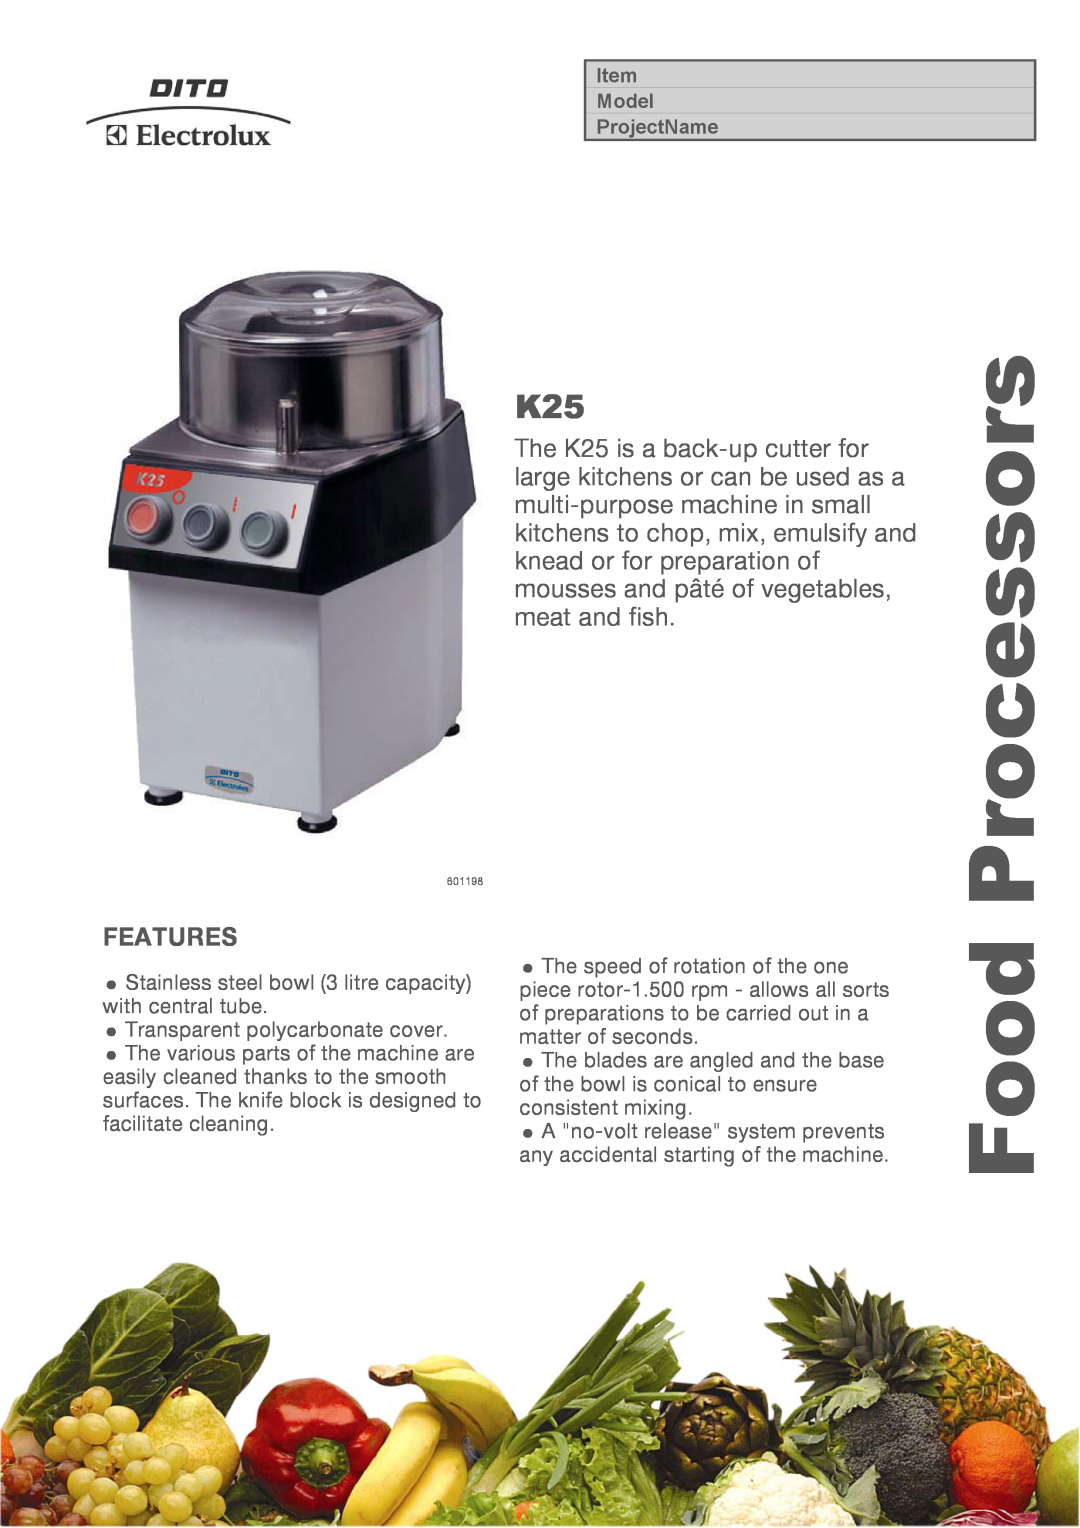 Electrolux 601198 manual Features, Processors, Food 